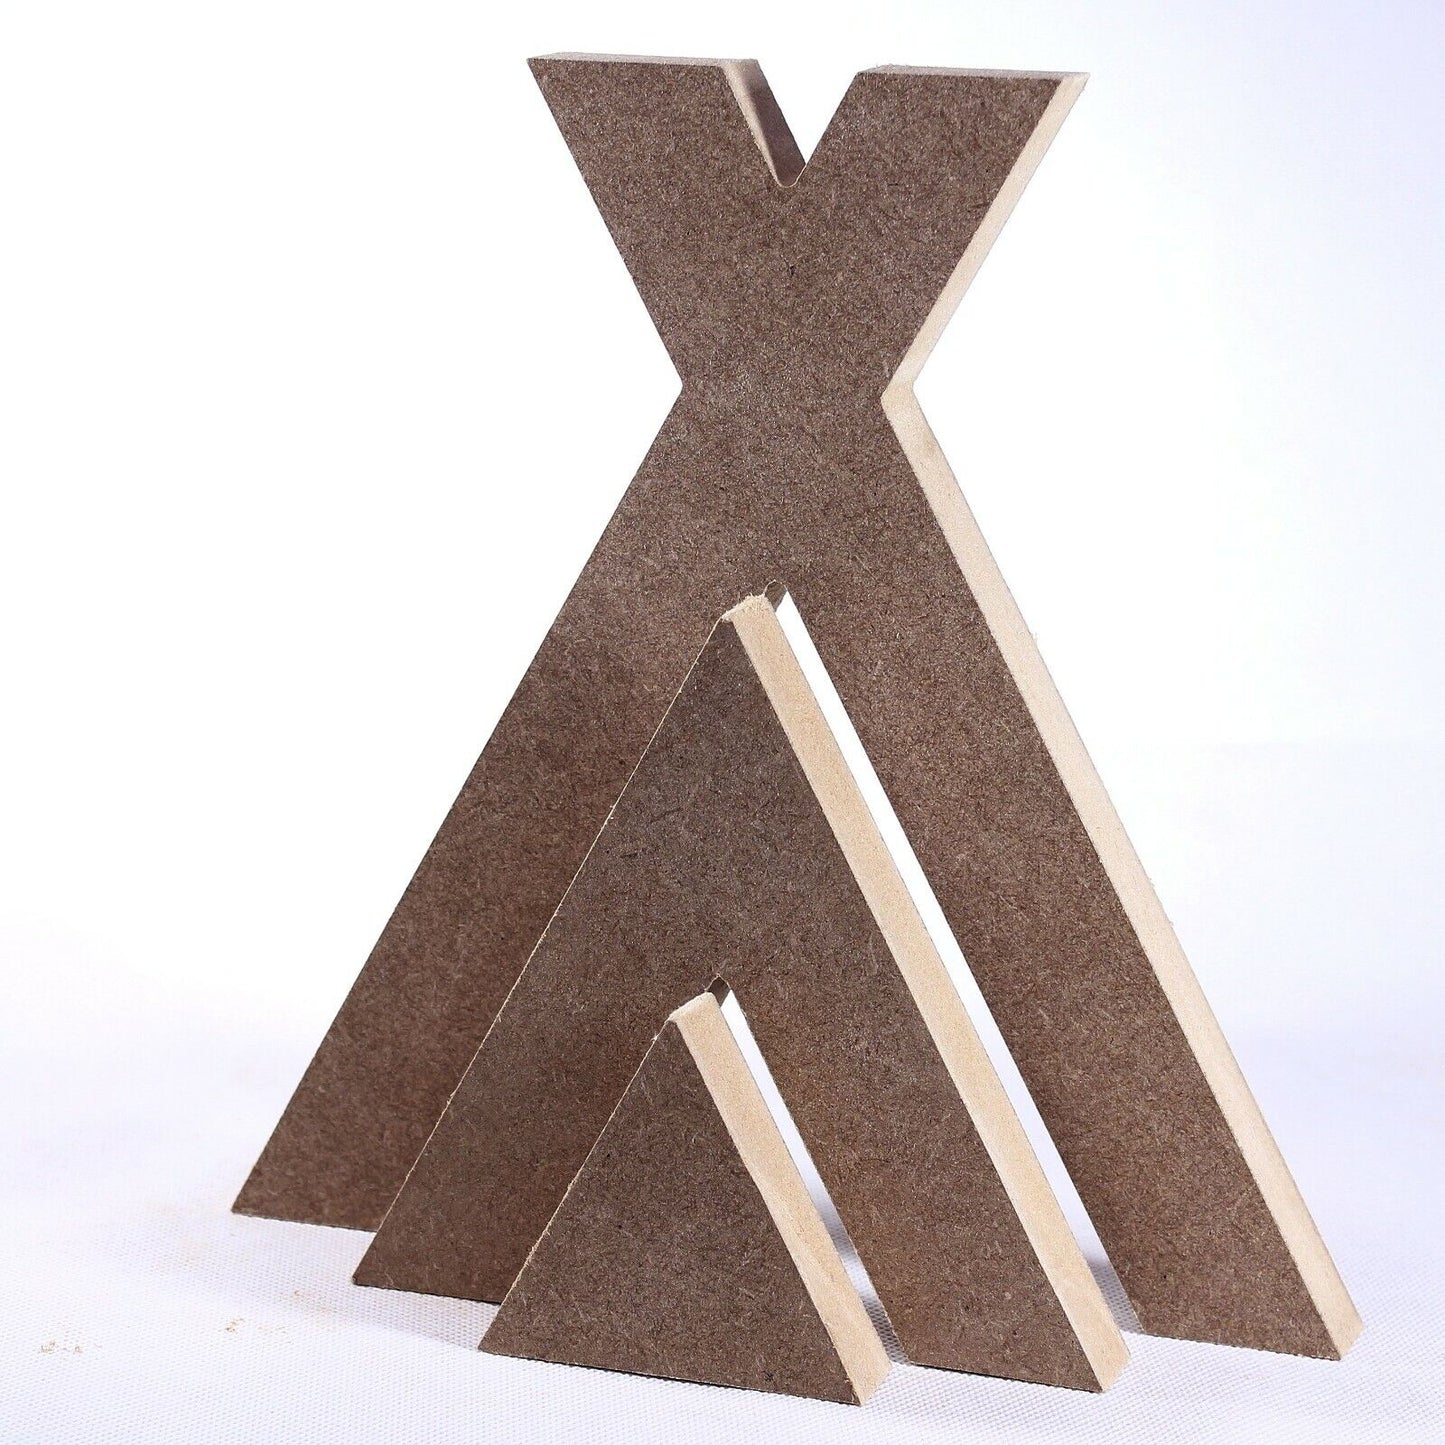 MDF Free Standing Teepee Block Group, 18mm MDF, Stacking, Wigwam, Stack